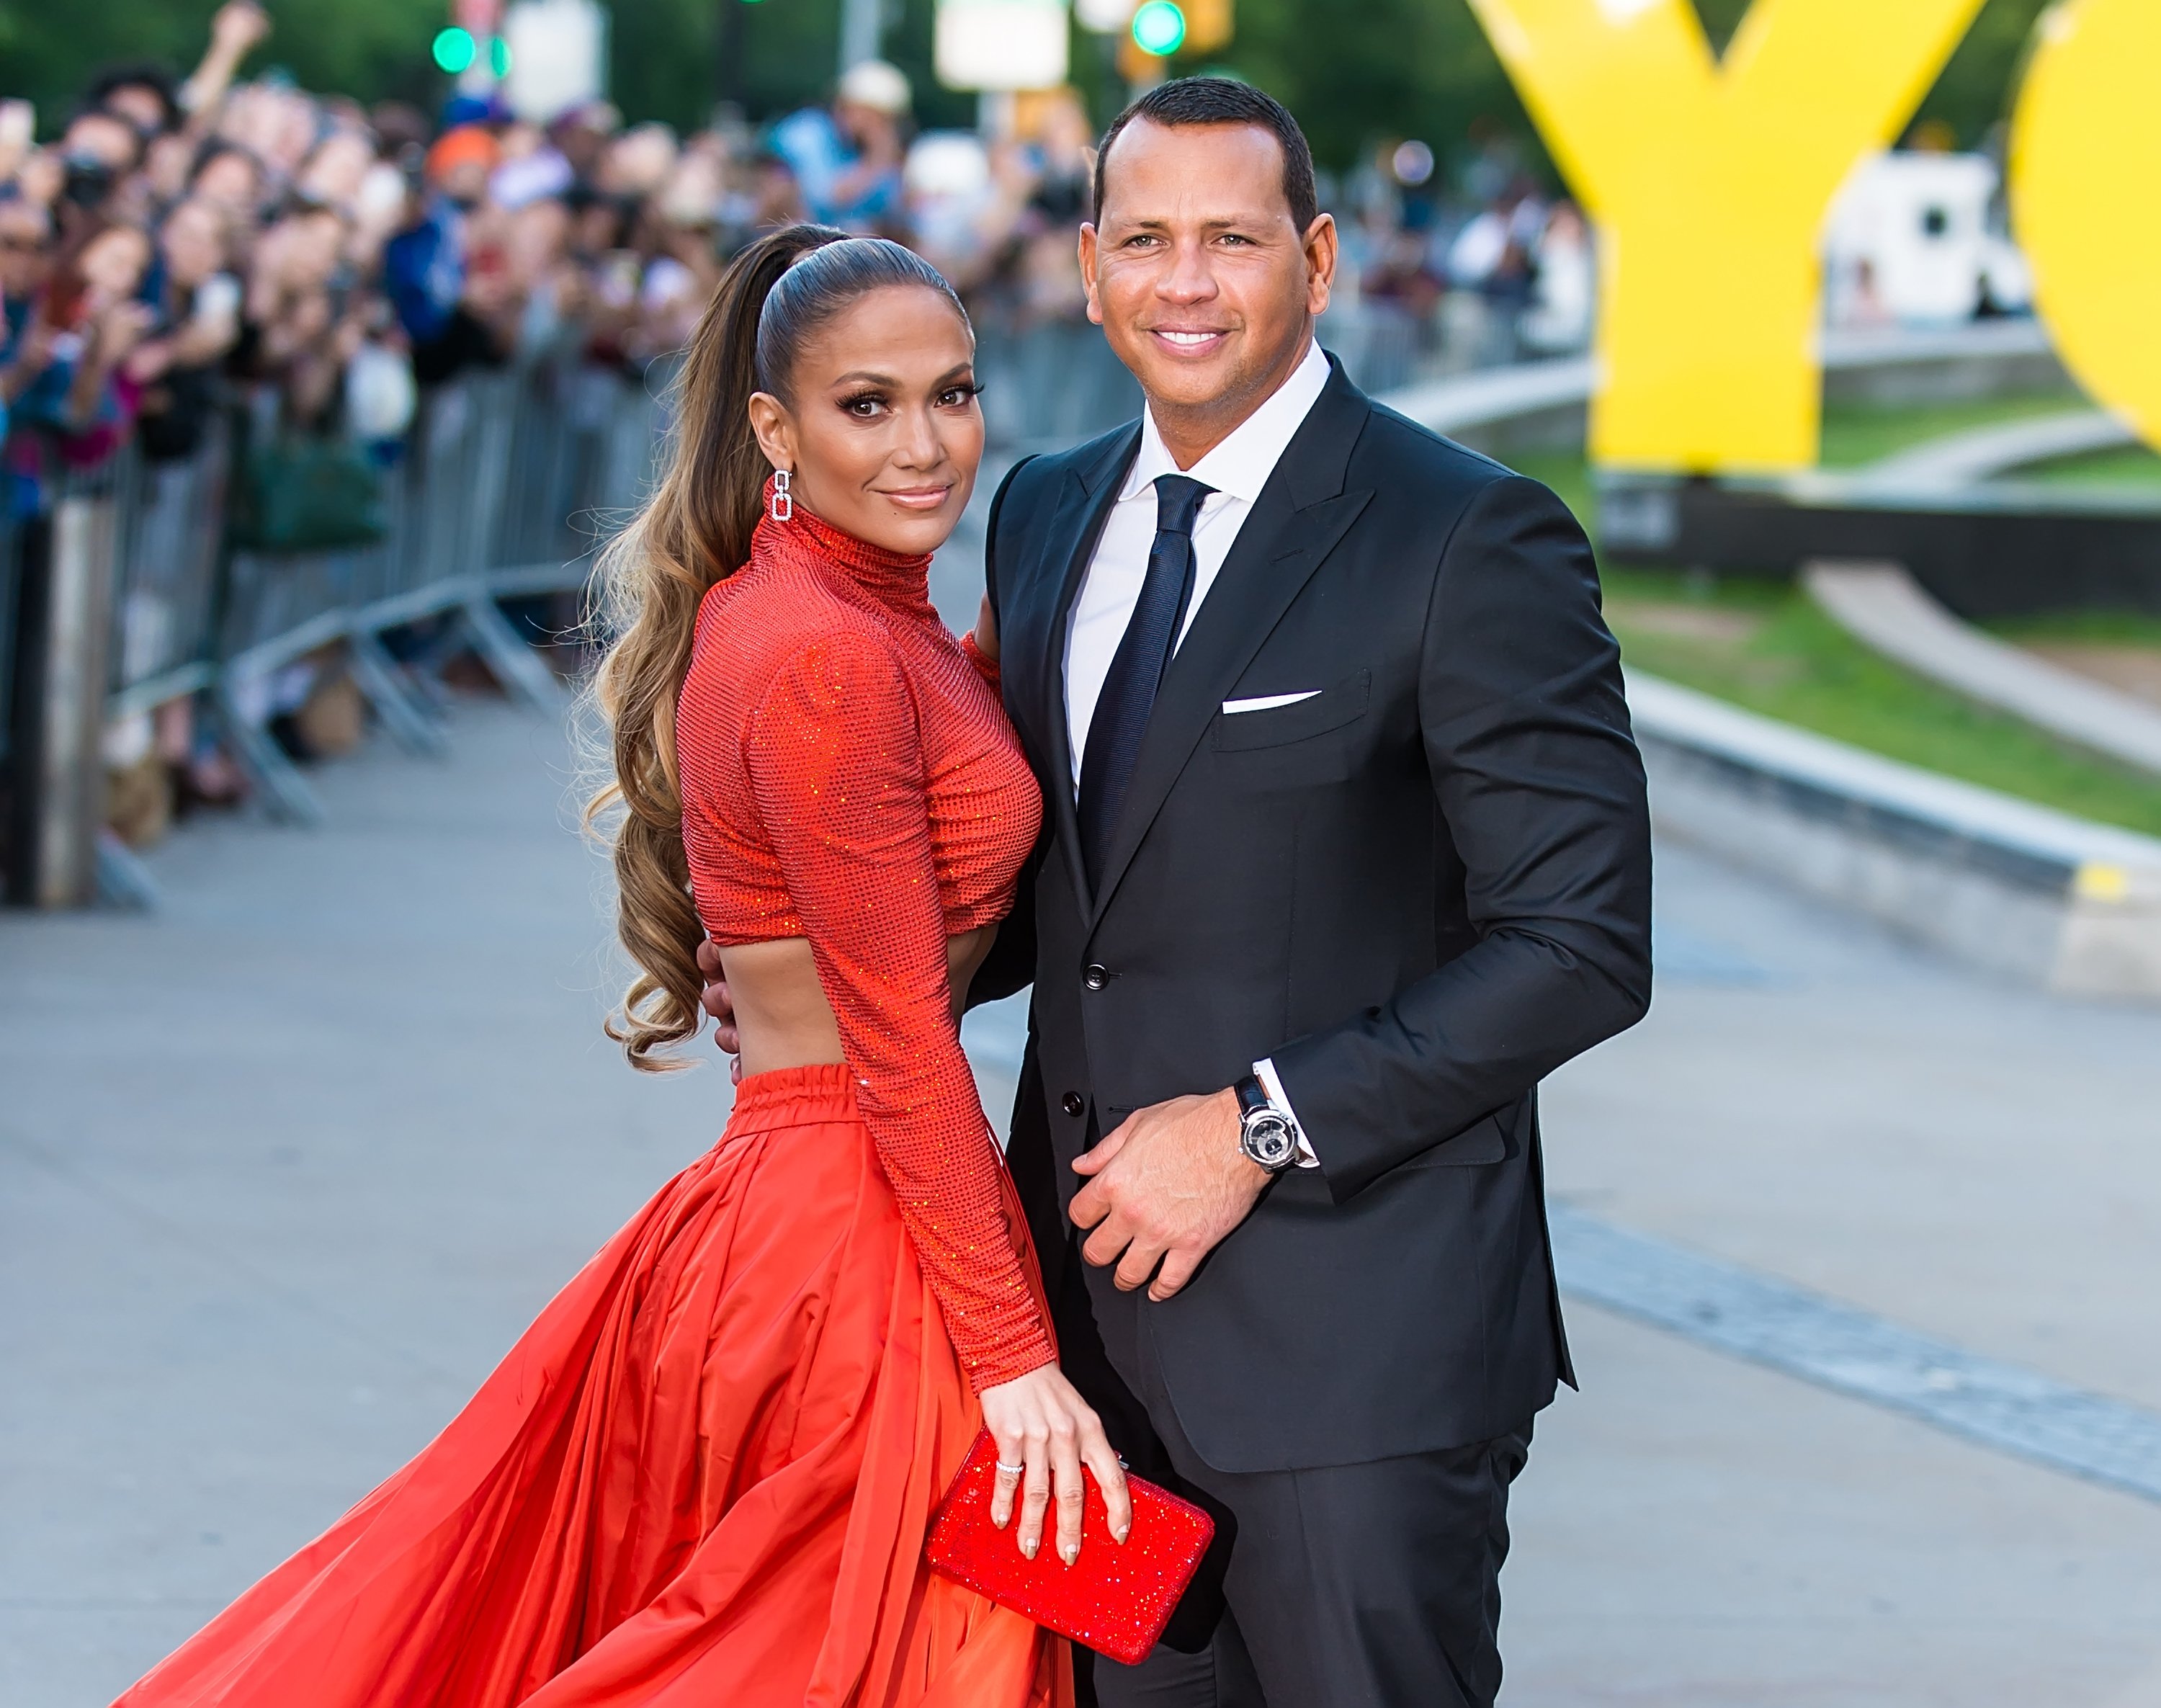 Jennifer Lopez and Alex Rodriguez arrive at the 2019 CFDA Fashion Awards on June 3, 2019, in New York City. | Source: Getty Images.